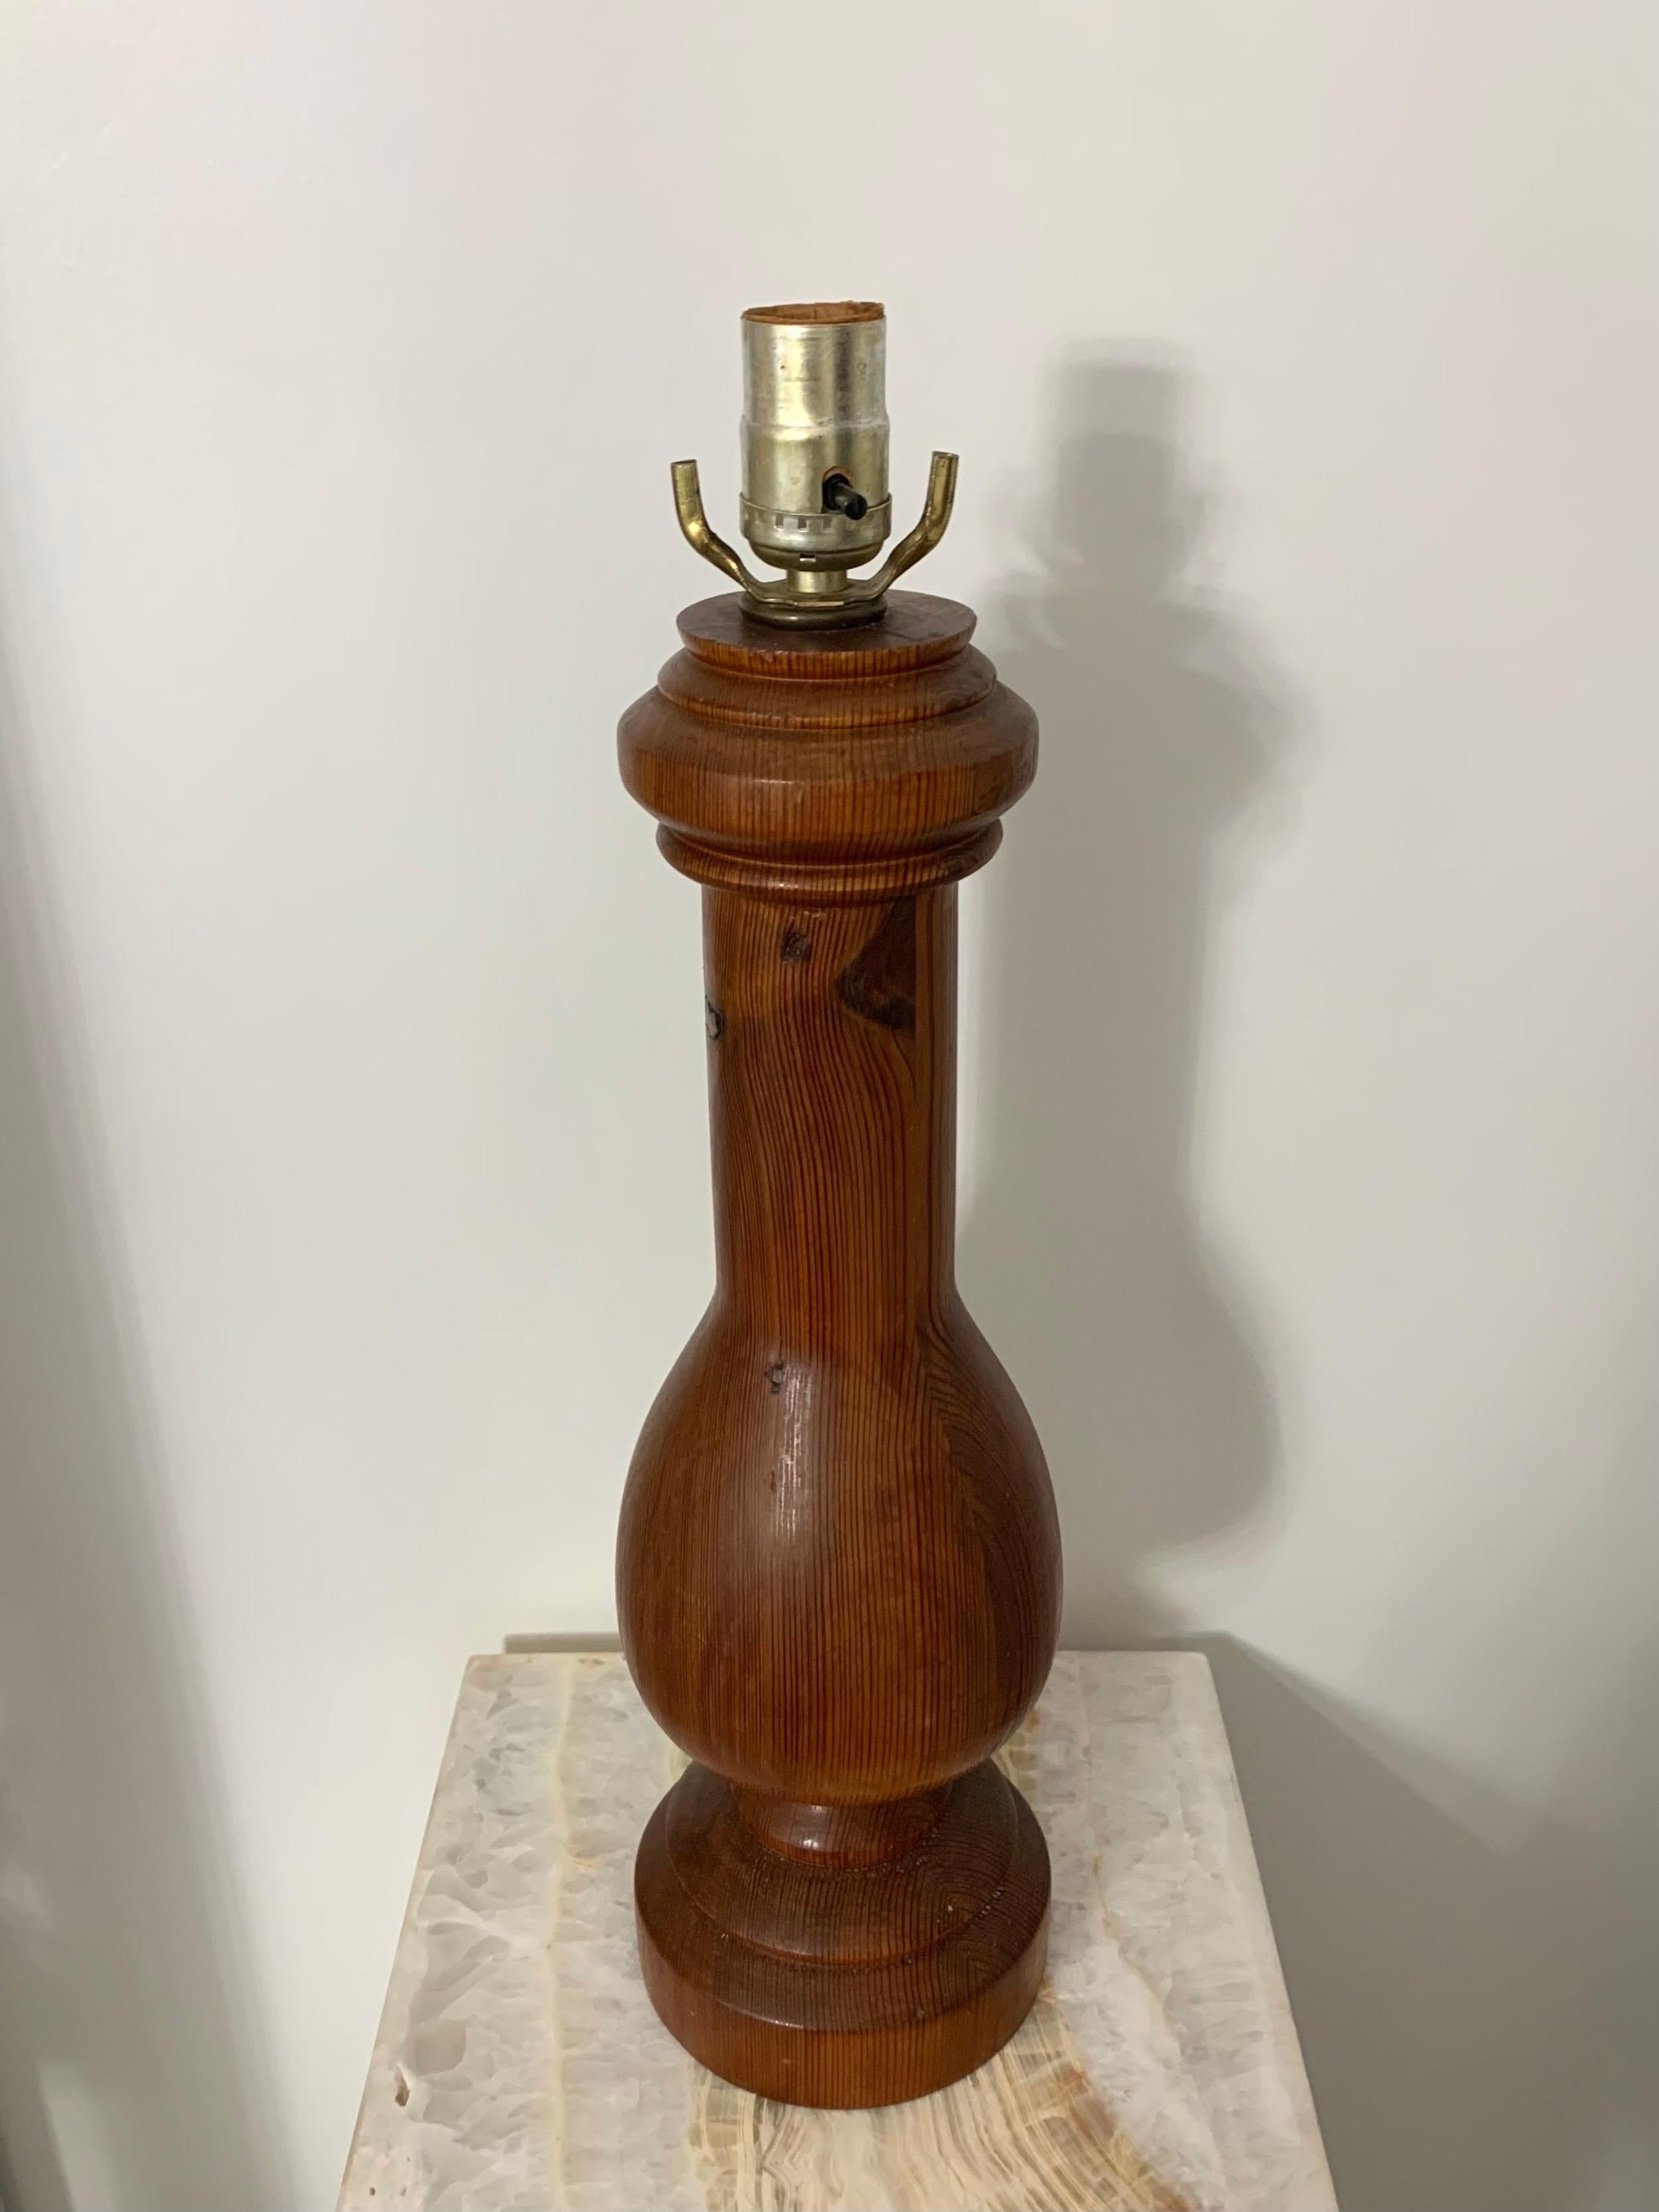 American Craftsman American Craft, Reclaimed Turned Wood Table Lamp, 1970s For Sale